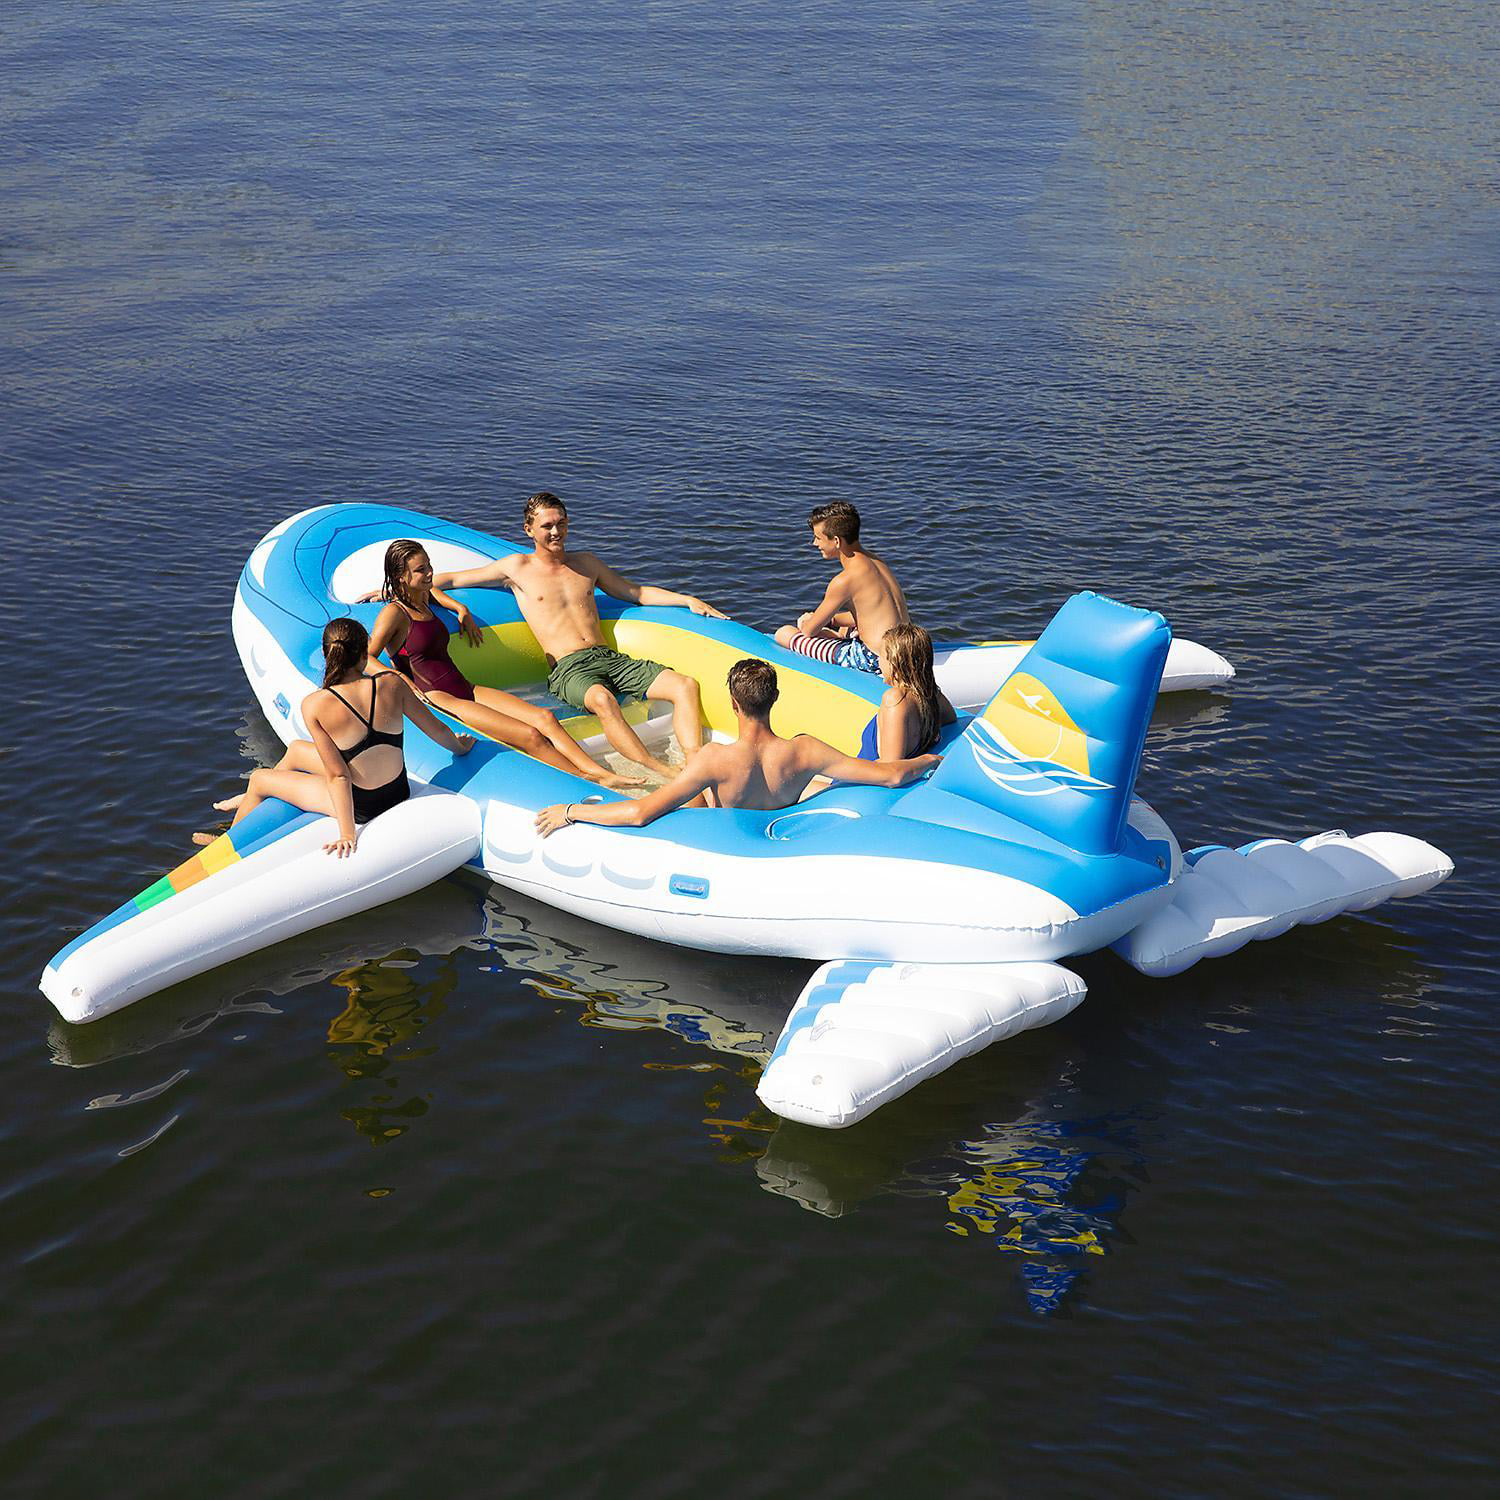 Airplane Inflatable Ride 6-Person Built-In Cup Holders Coolers Boarding Platform 